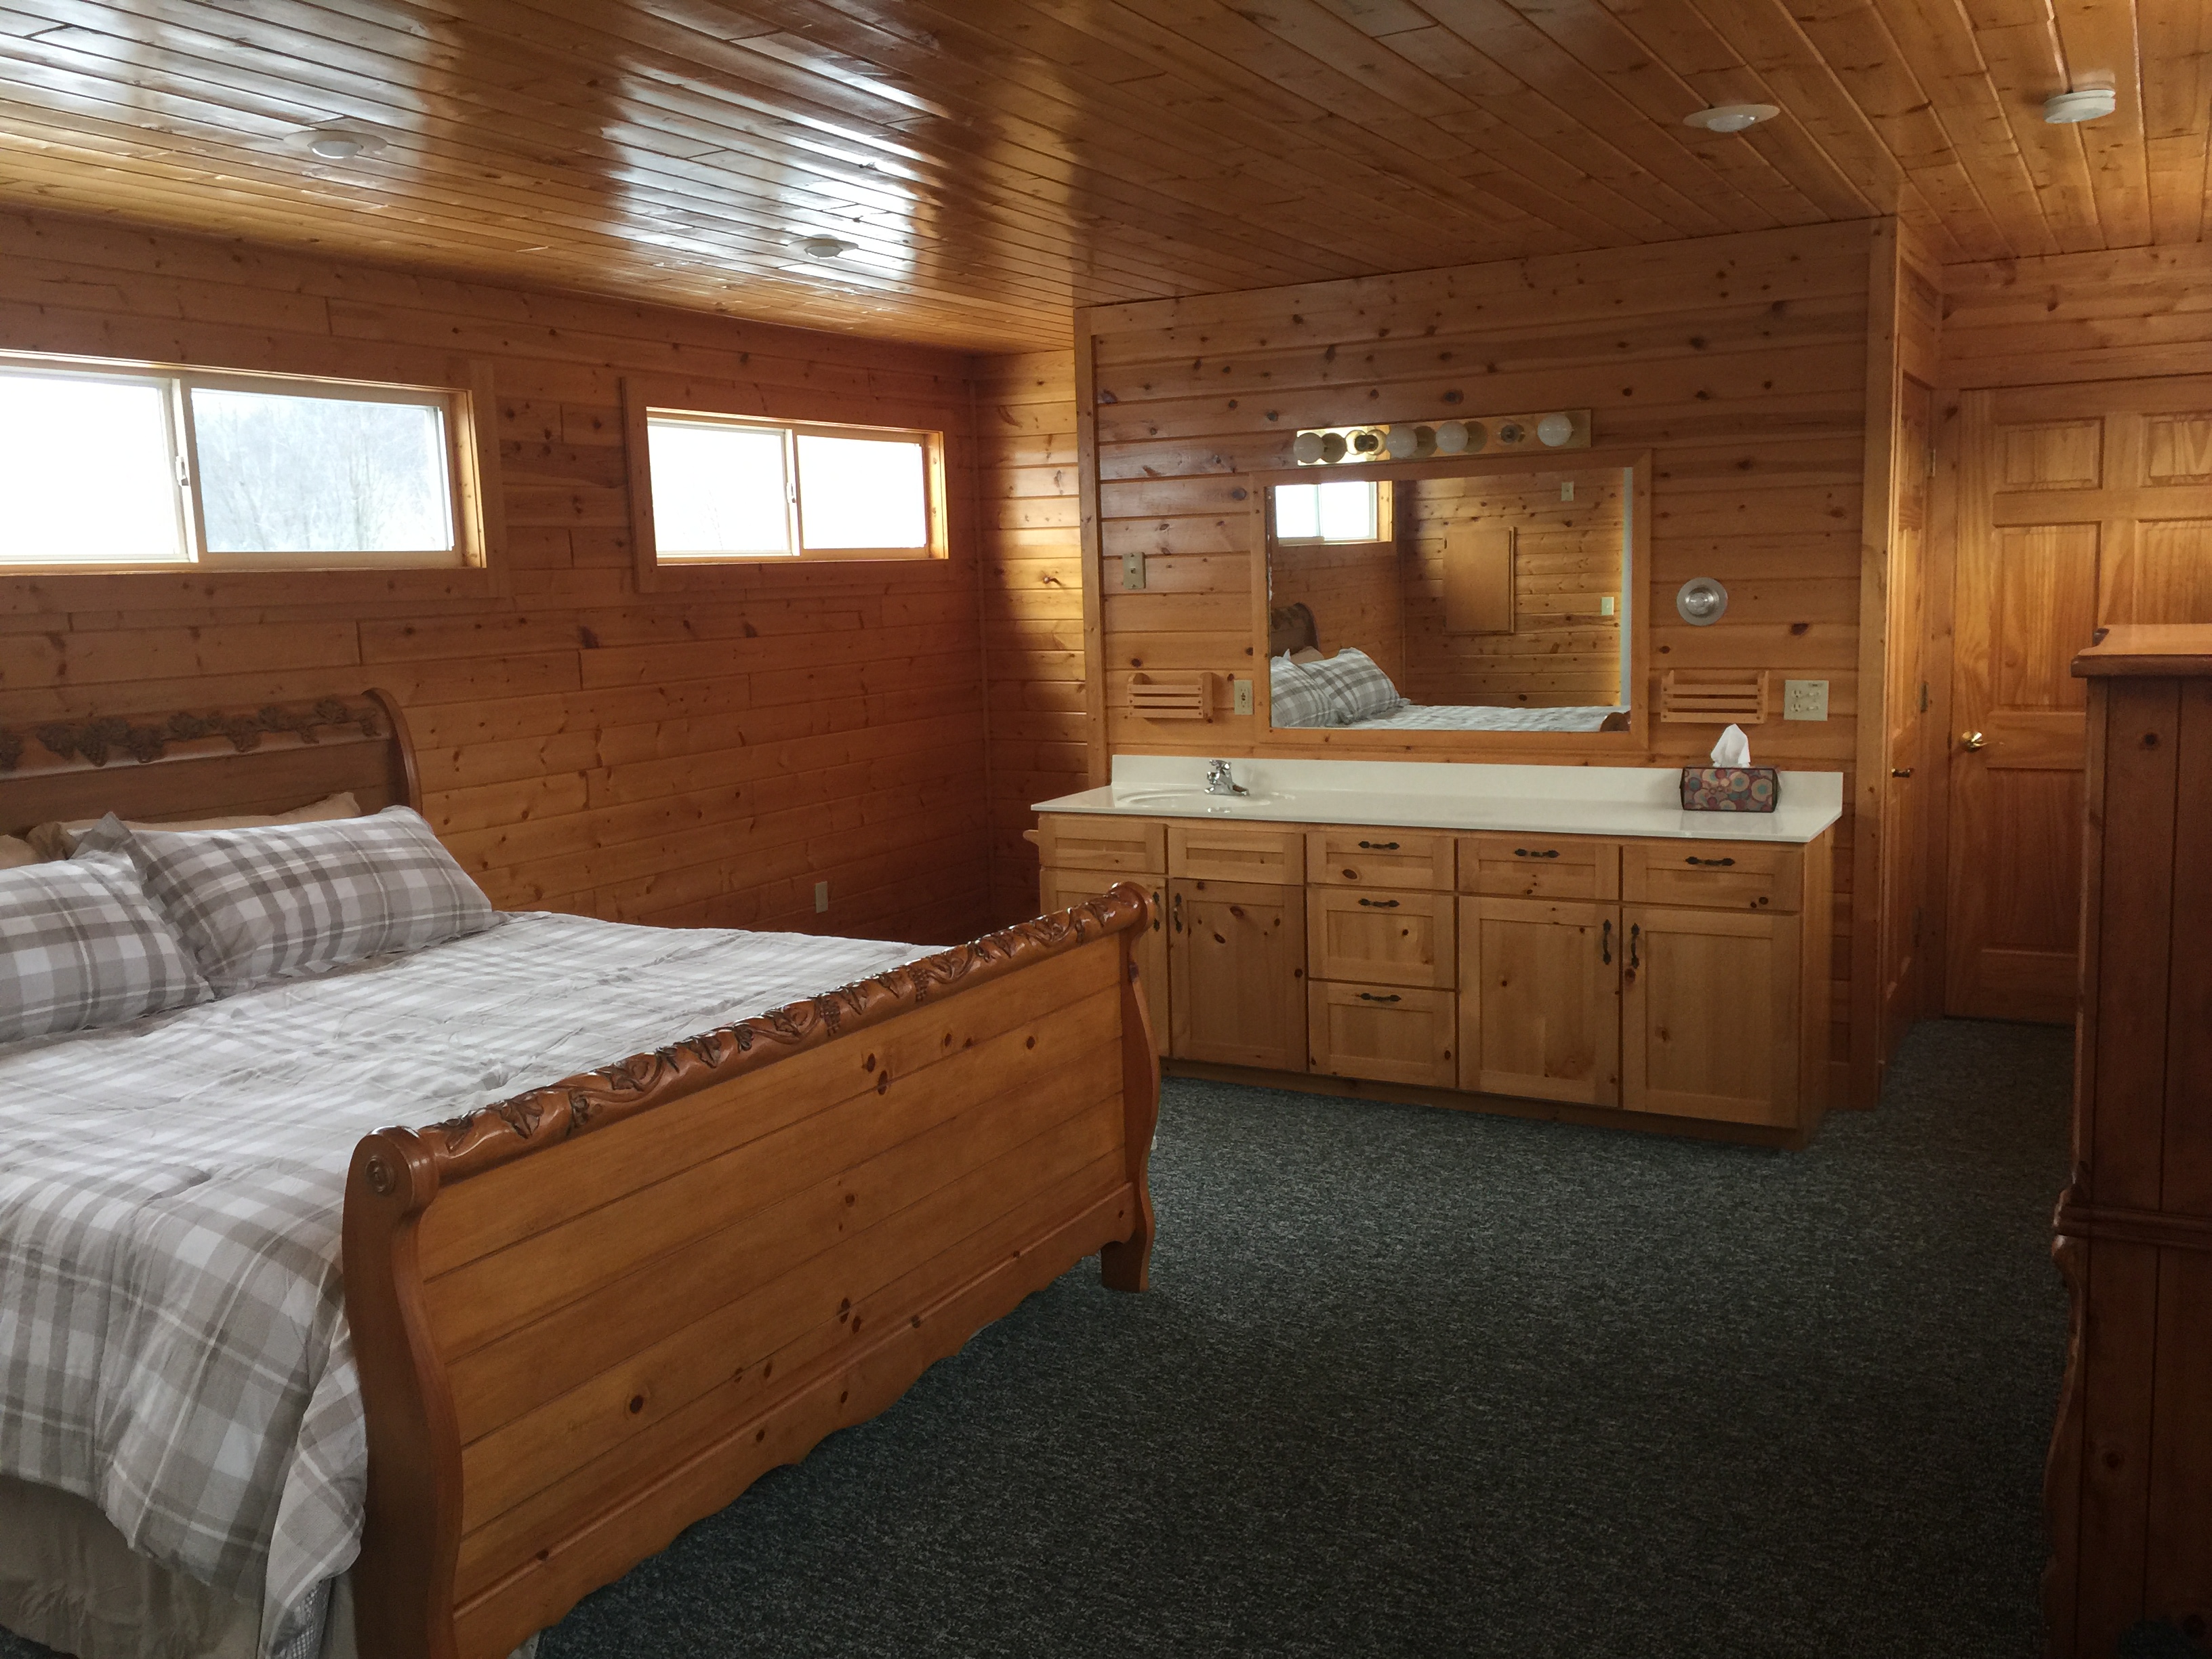 2nd Third floor master bedroom with private bathroom, including shower at Torch Lake Lodge.